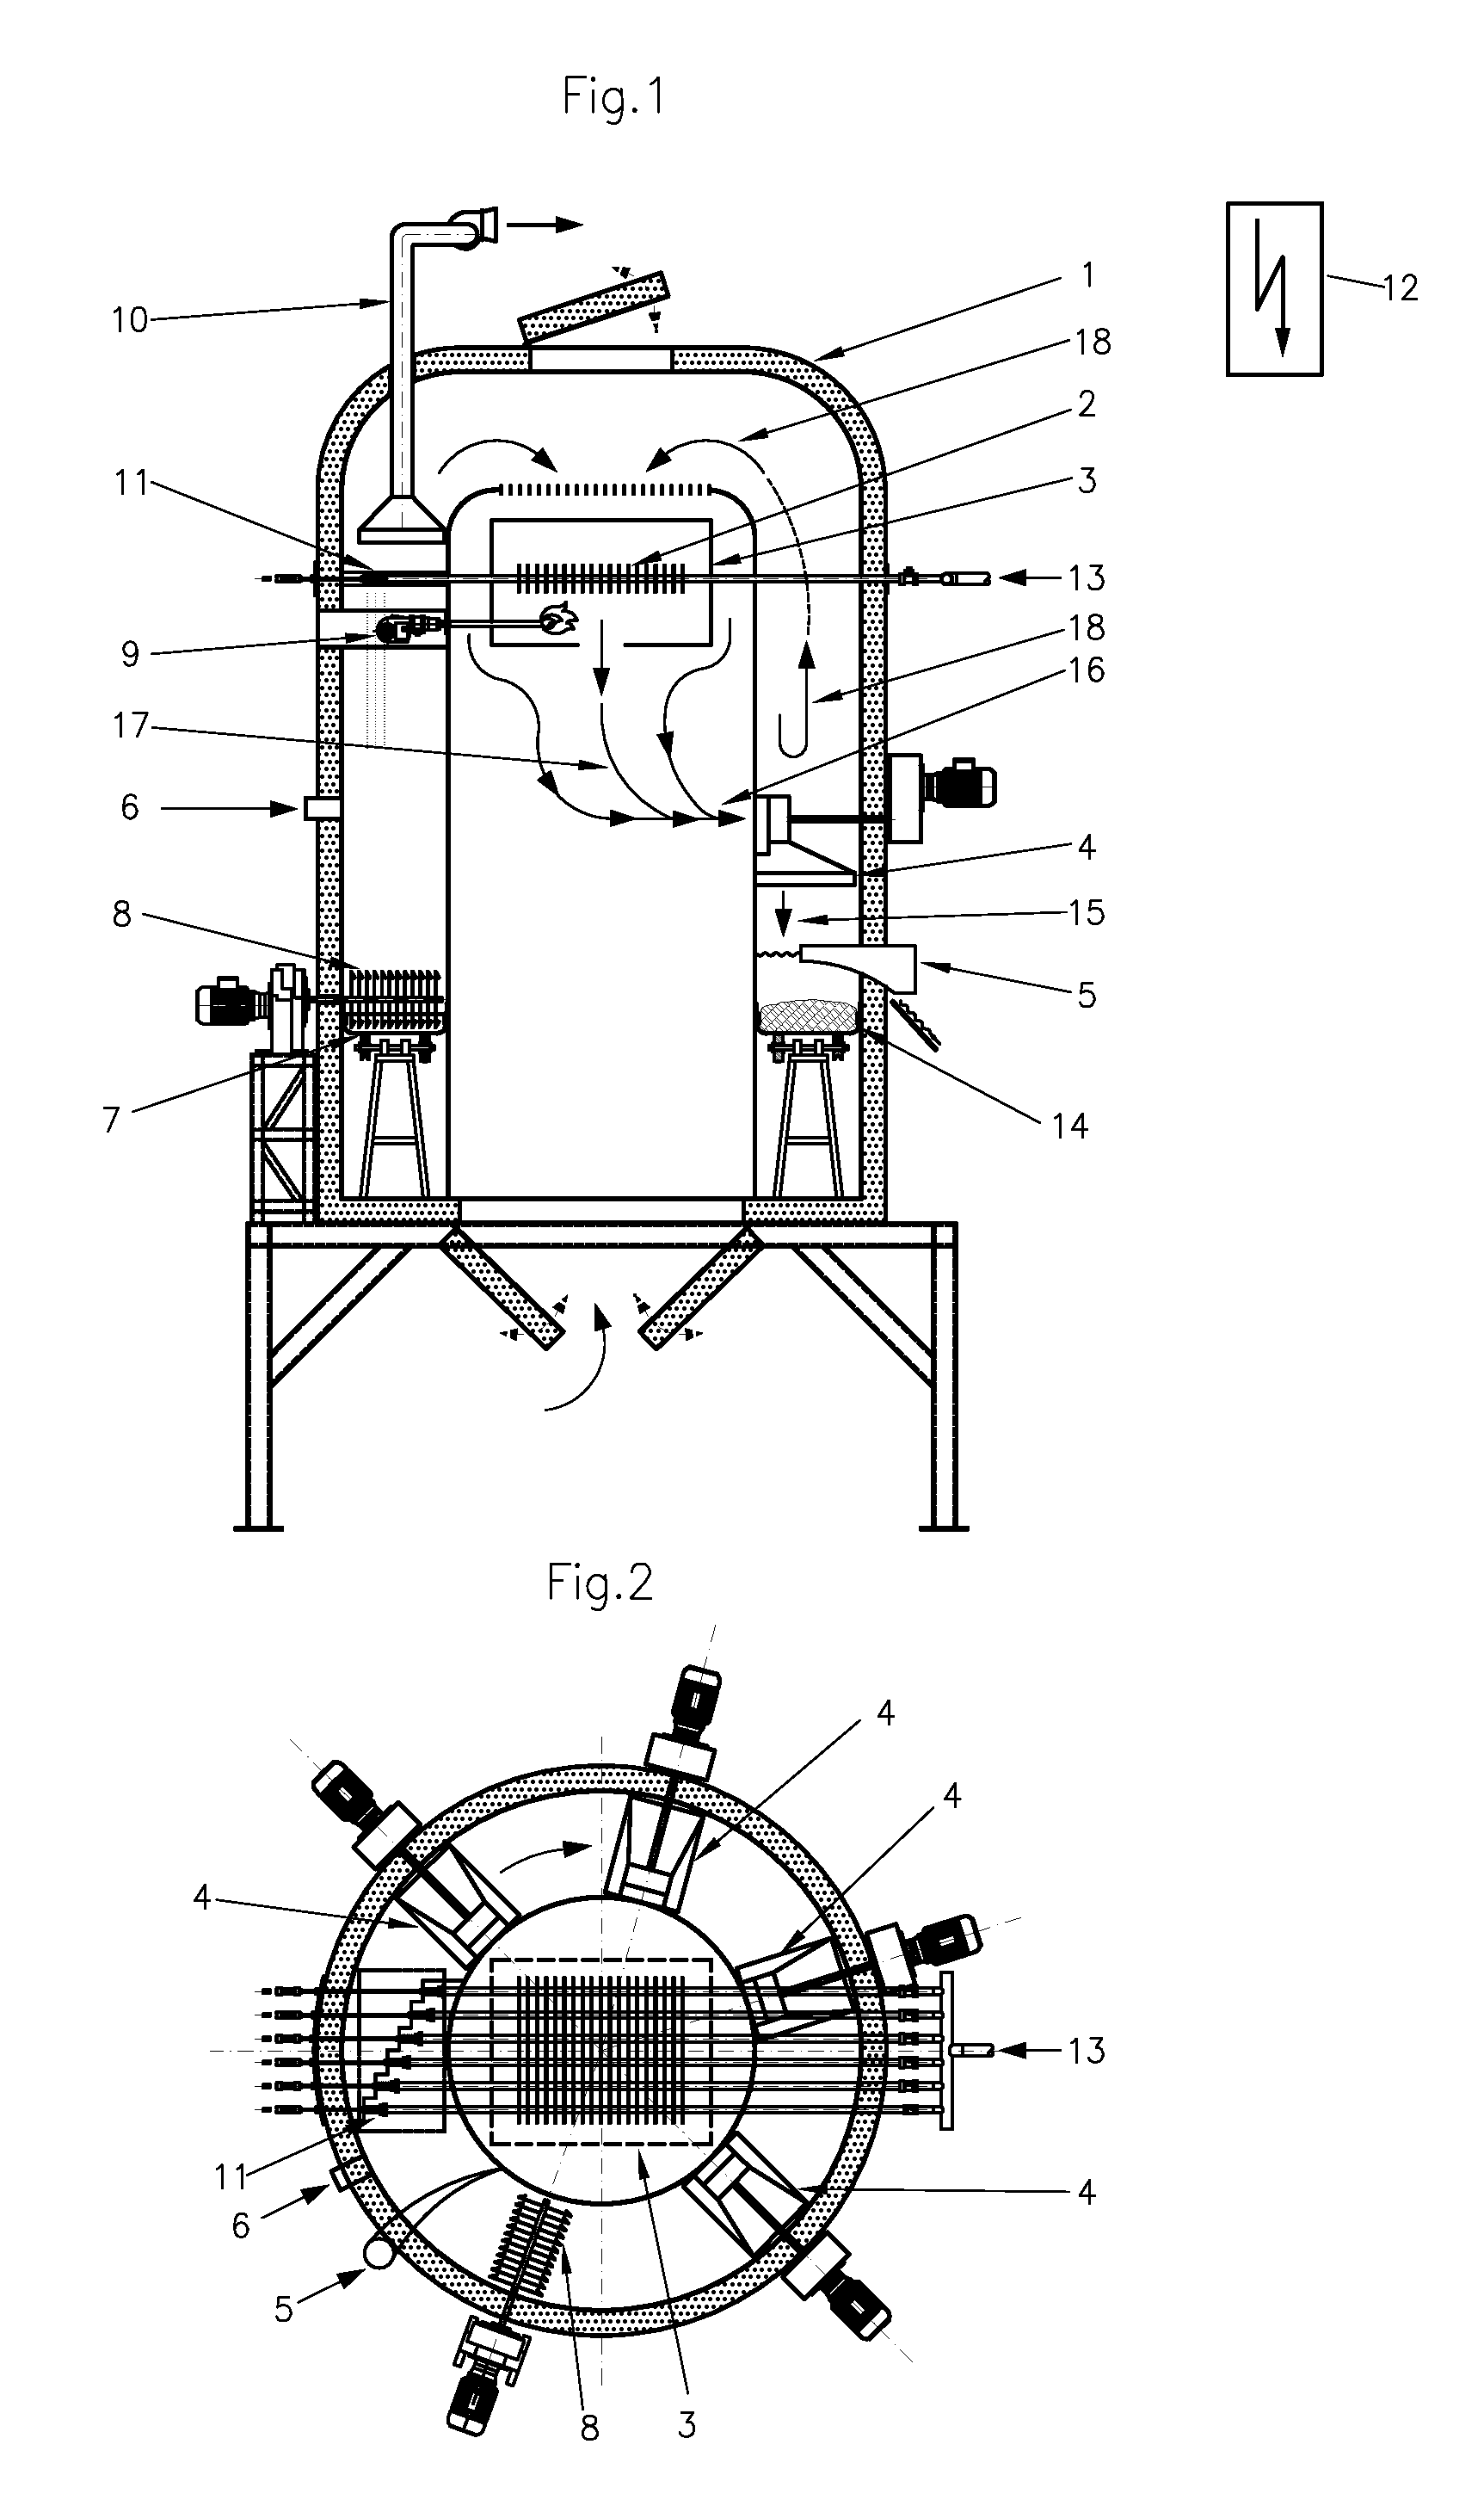 Method of processing and drying waste in a cyclic continuous process